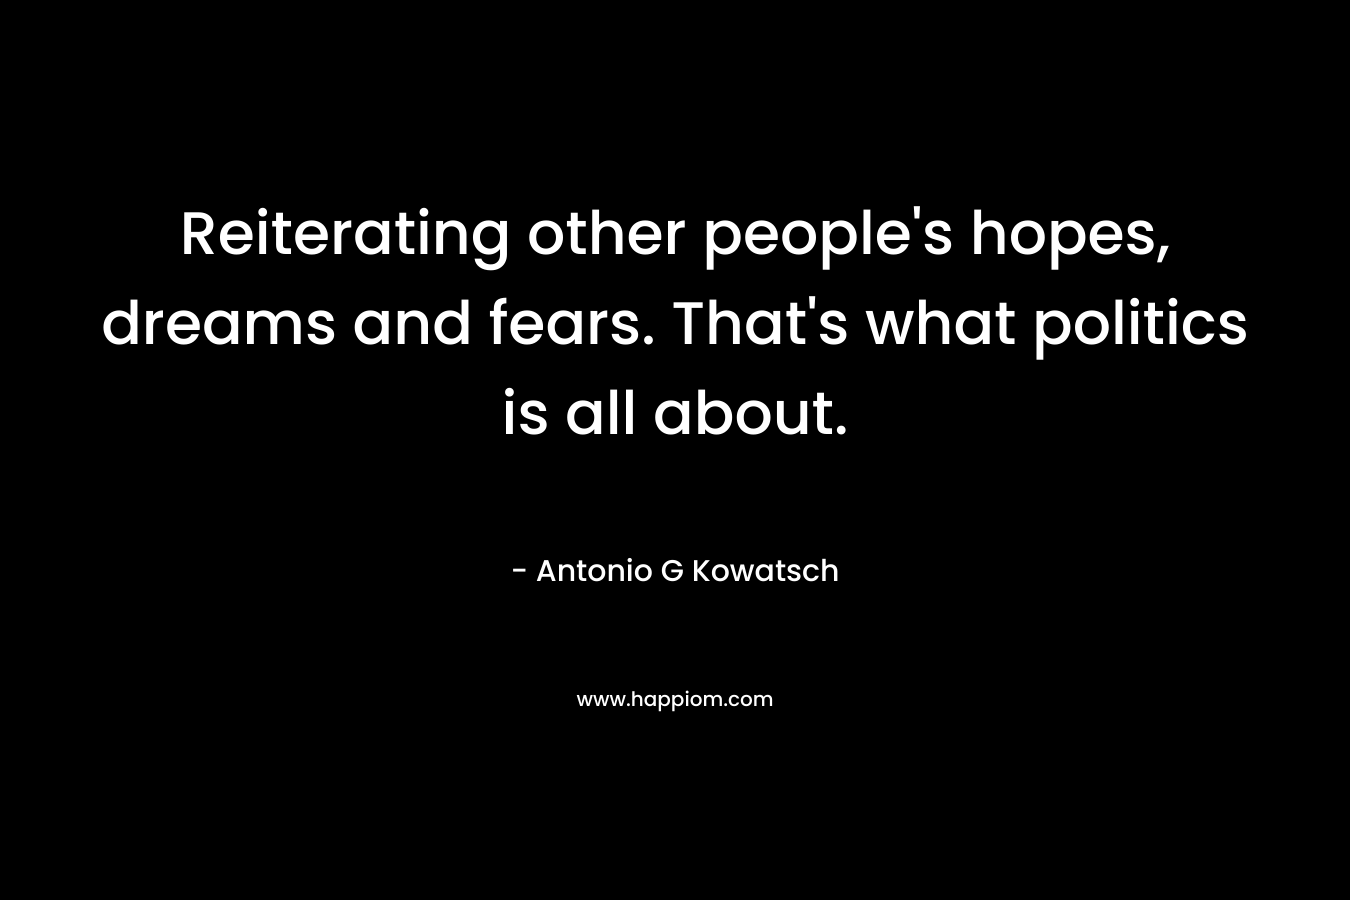 Reiterating other people's hopes, dreams and fears. That's what politics is all about.